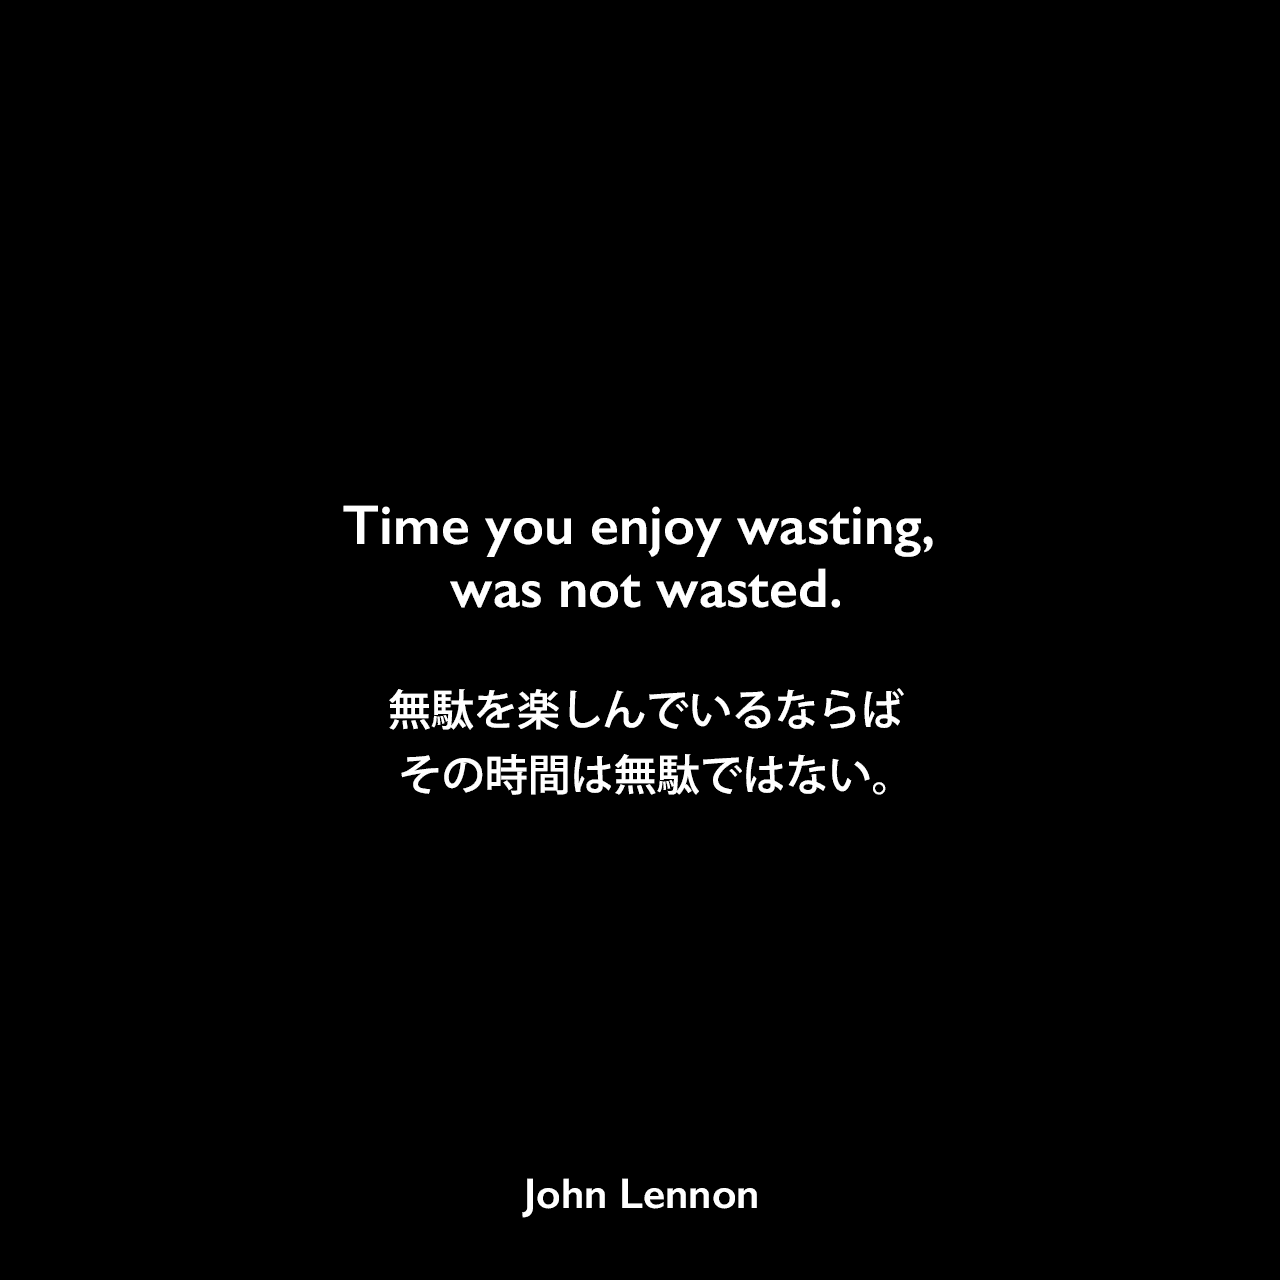 Time you enjoy wasting, was not wasted.無駄を楽しんでいるならば、その時間は無駄ではない。